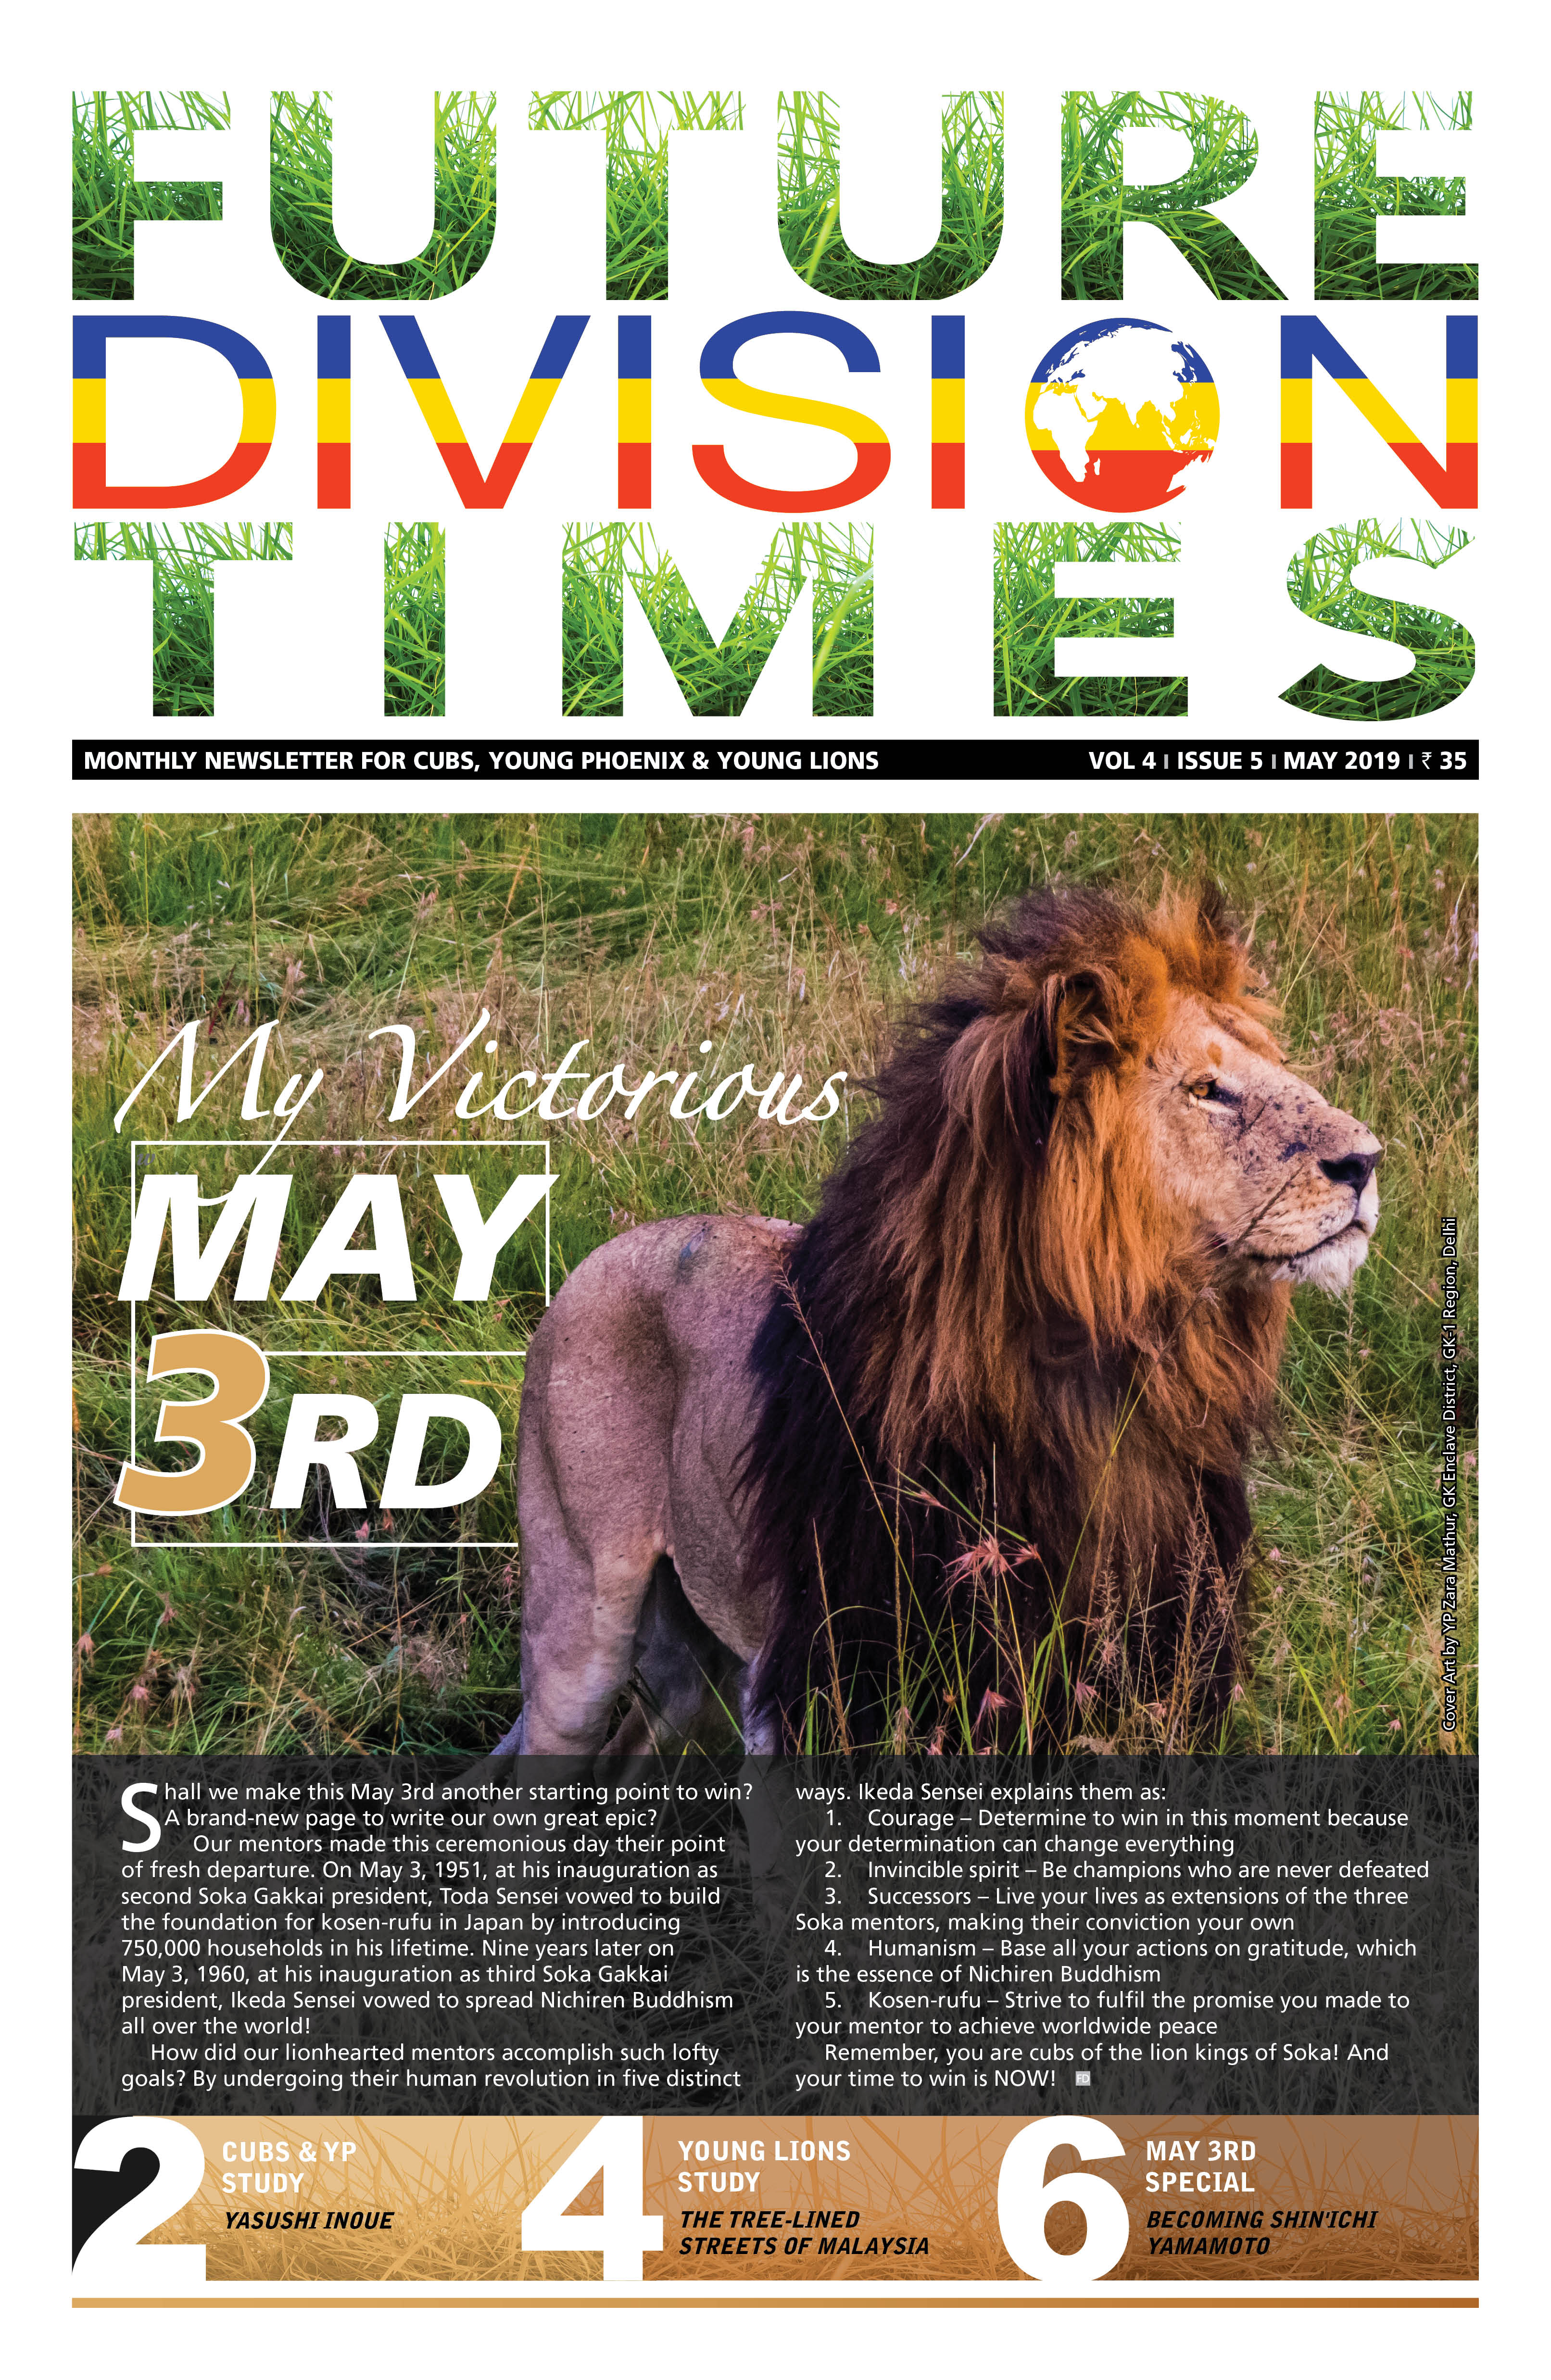 FD Times Vol.4/Issue5 (May 2019)